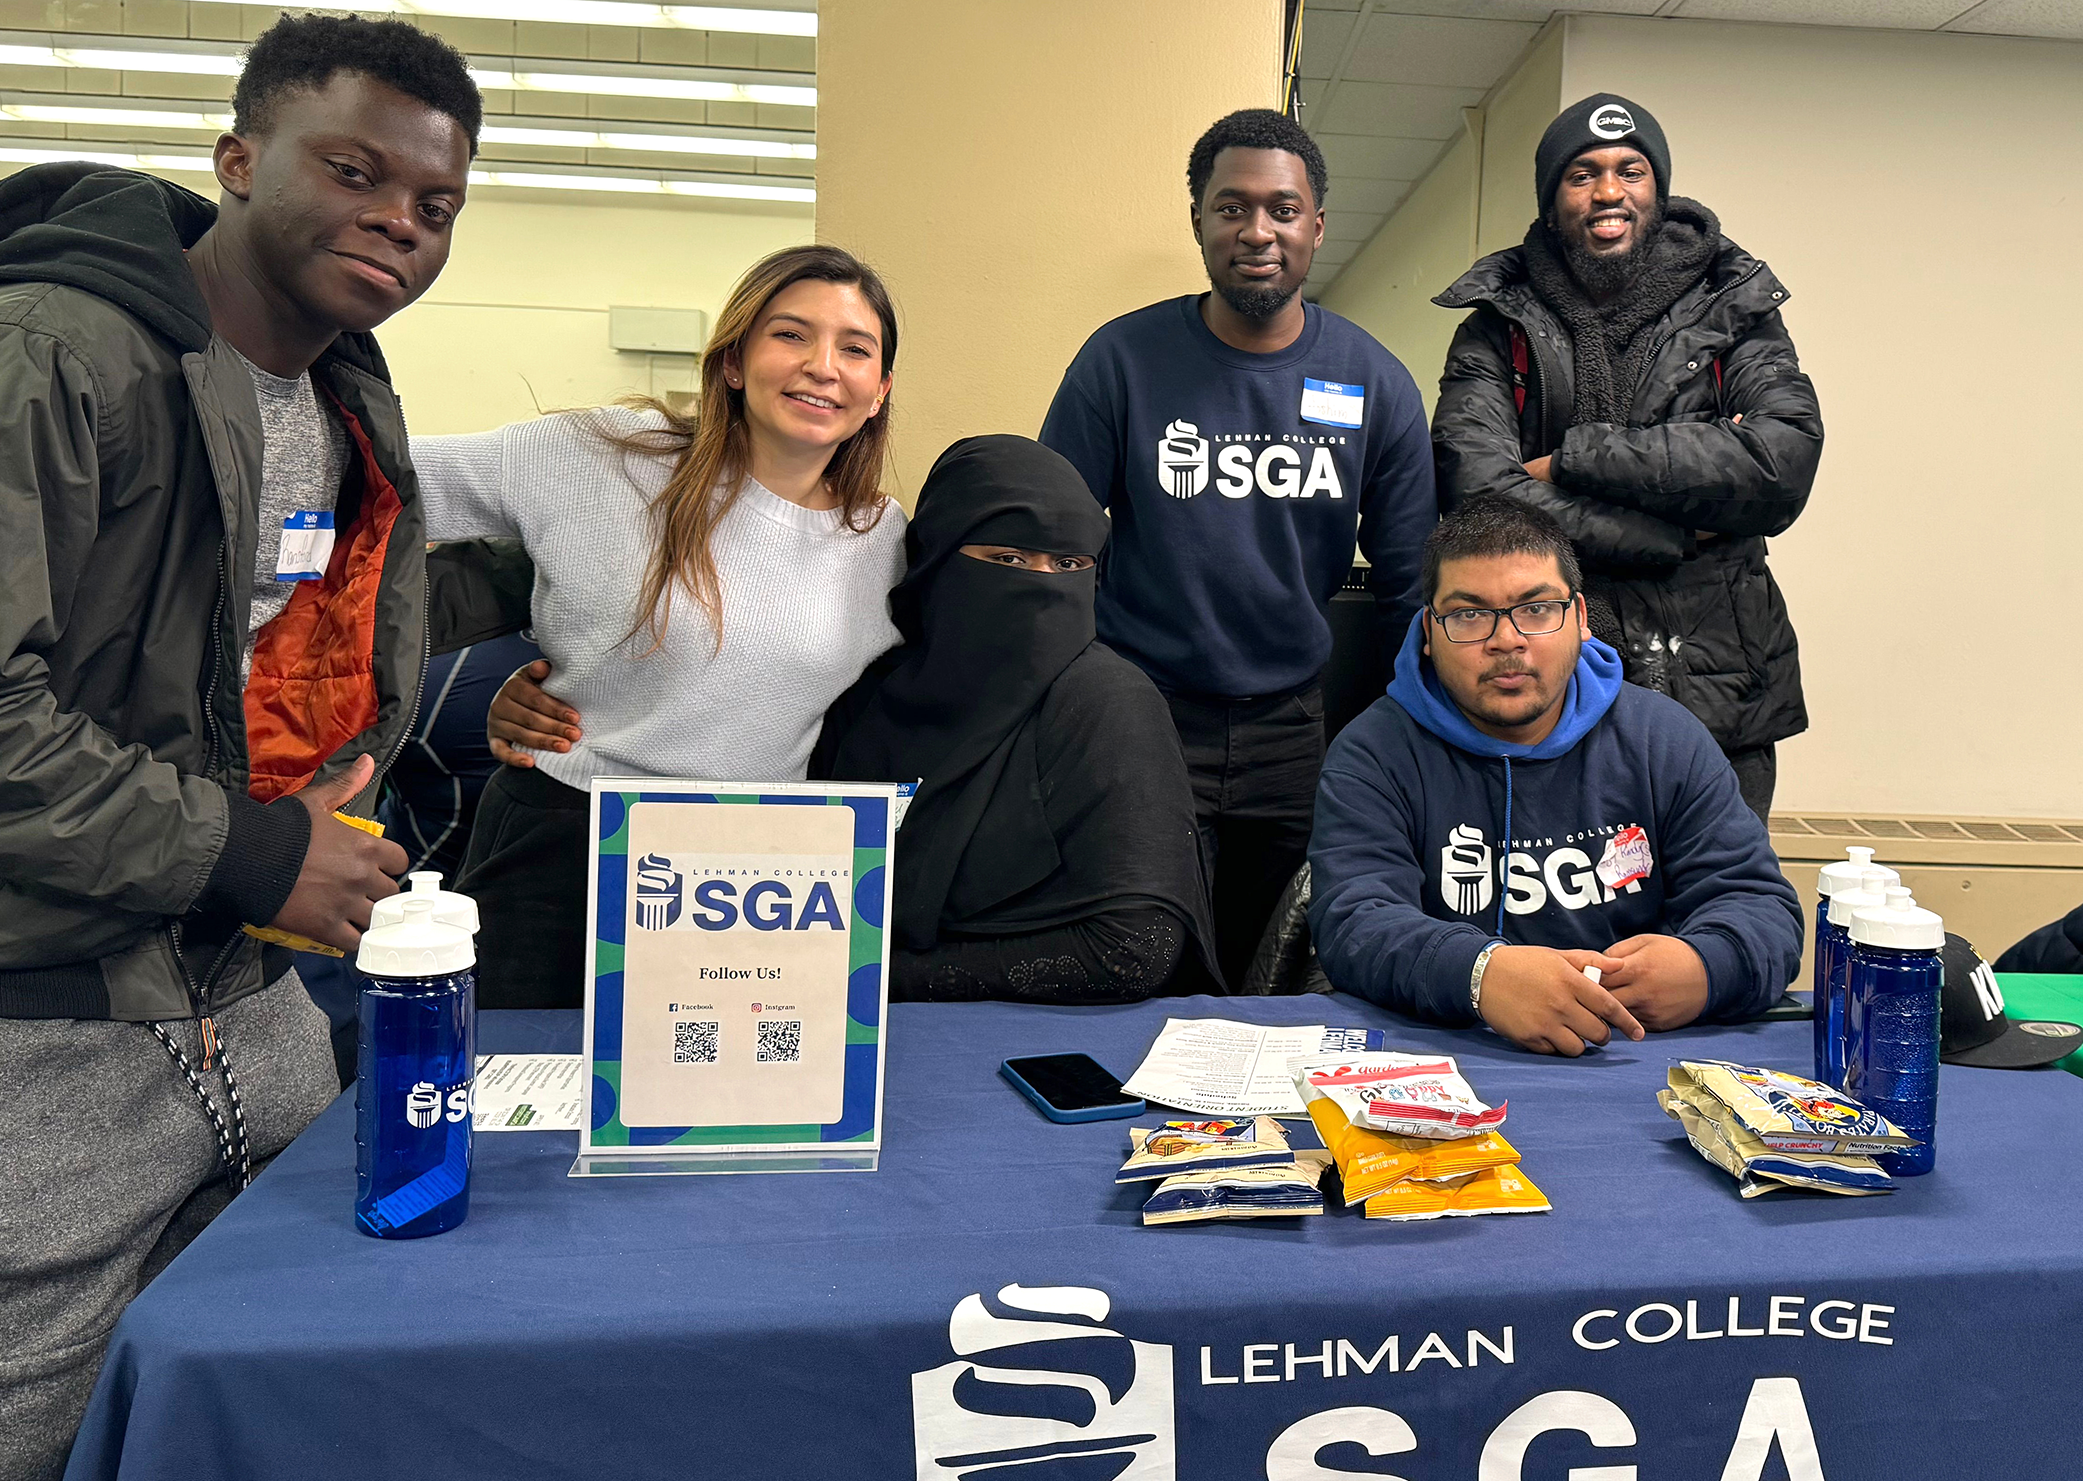 Photo of the Week: The Lehman College Student Government Association (SGA) showed up as a team at Tuesday's New Student Orientation and Resource Fair. (Photo by Janel Martinez)